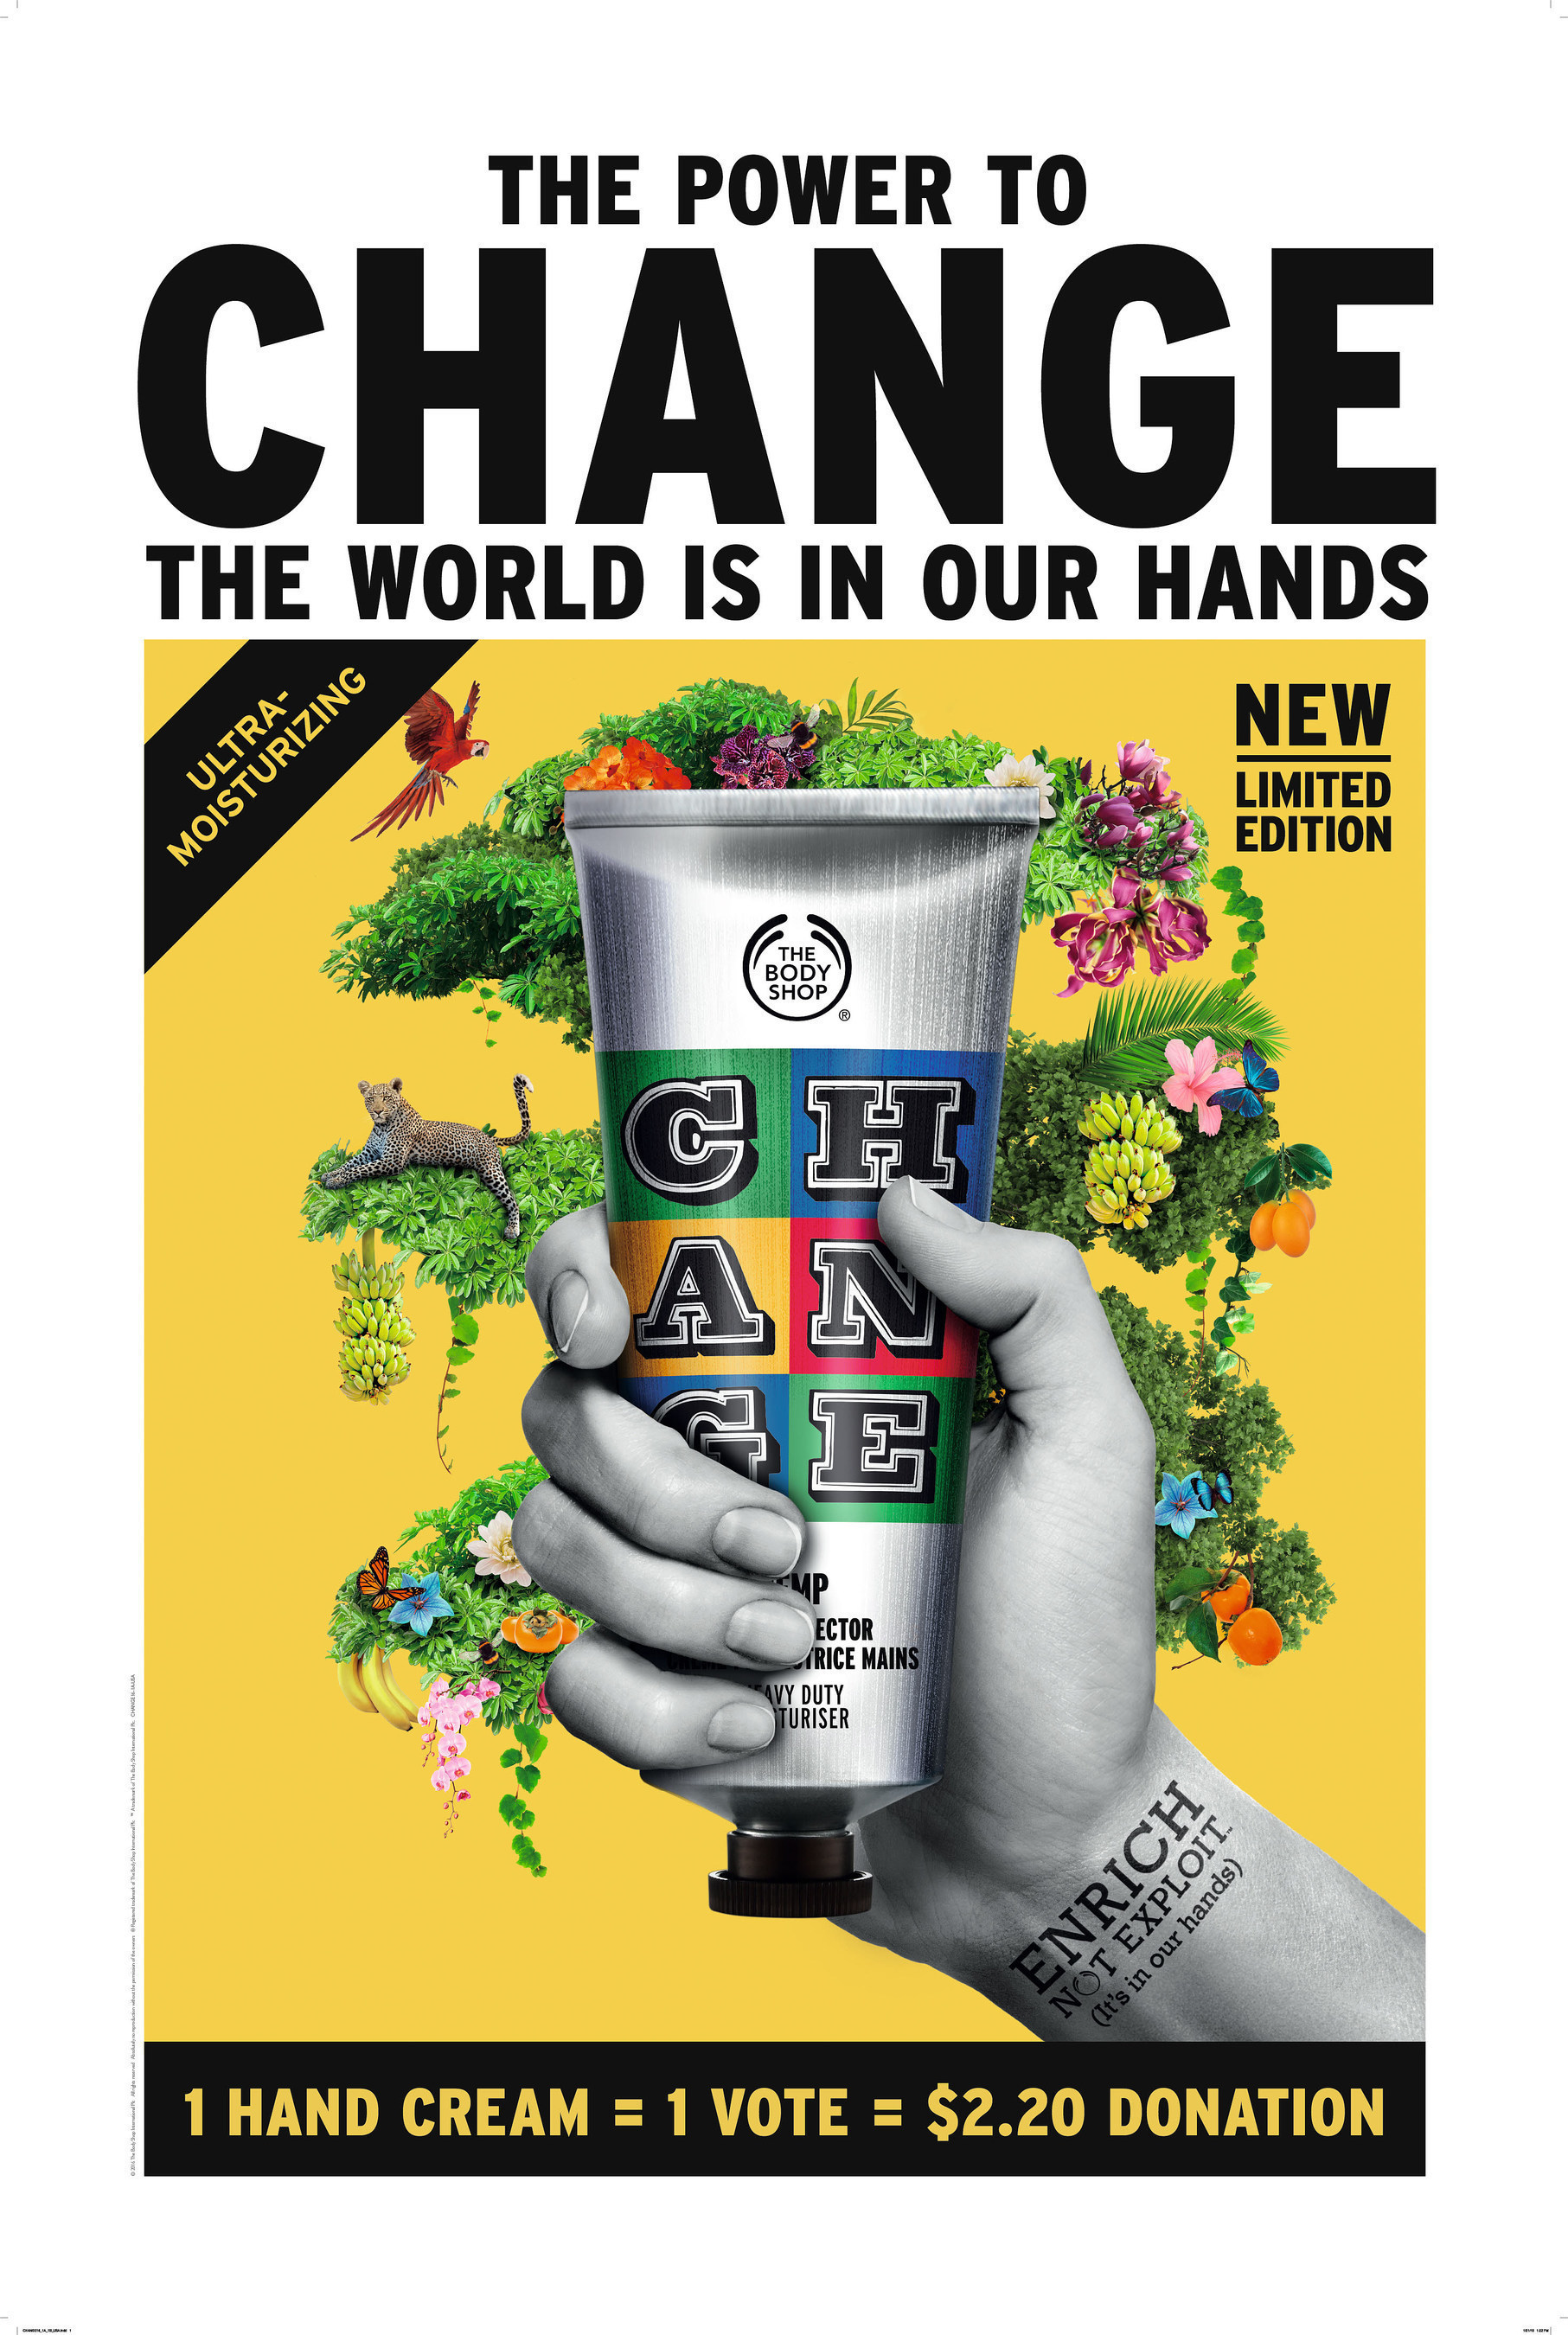 The Body Shop's New Limited Edition Hemp Hand Protector puts the power to change the world in your hands